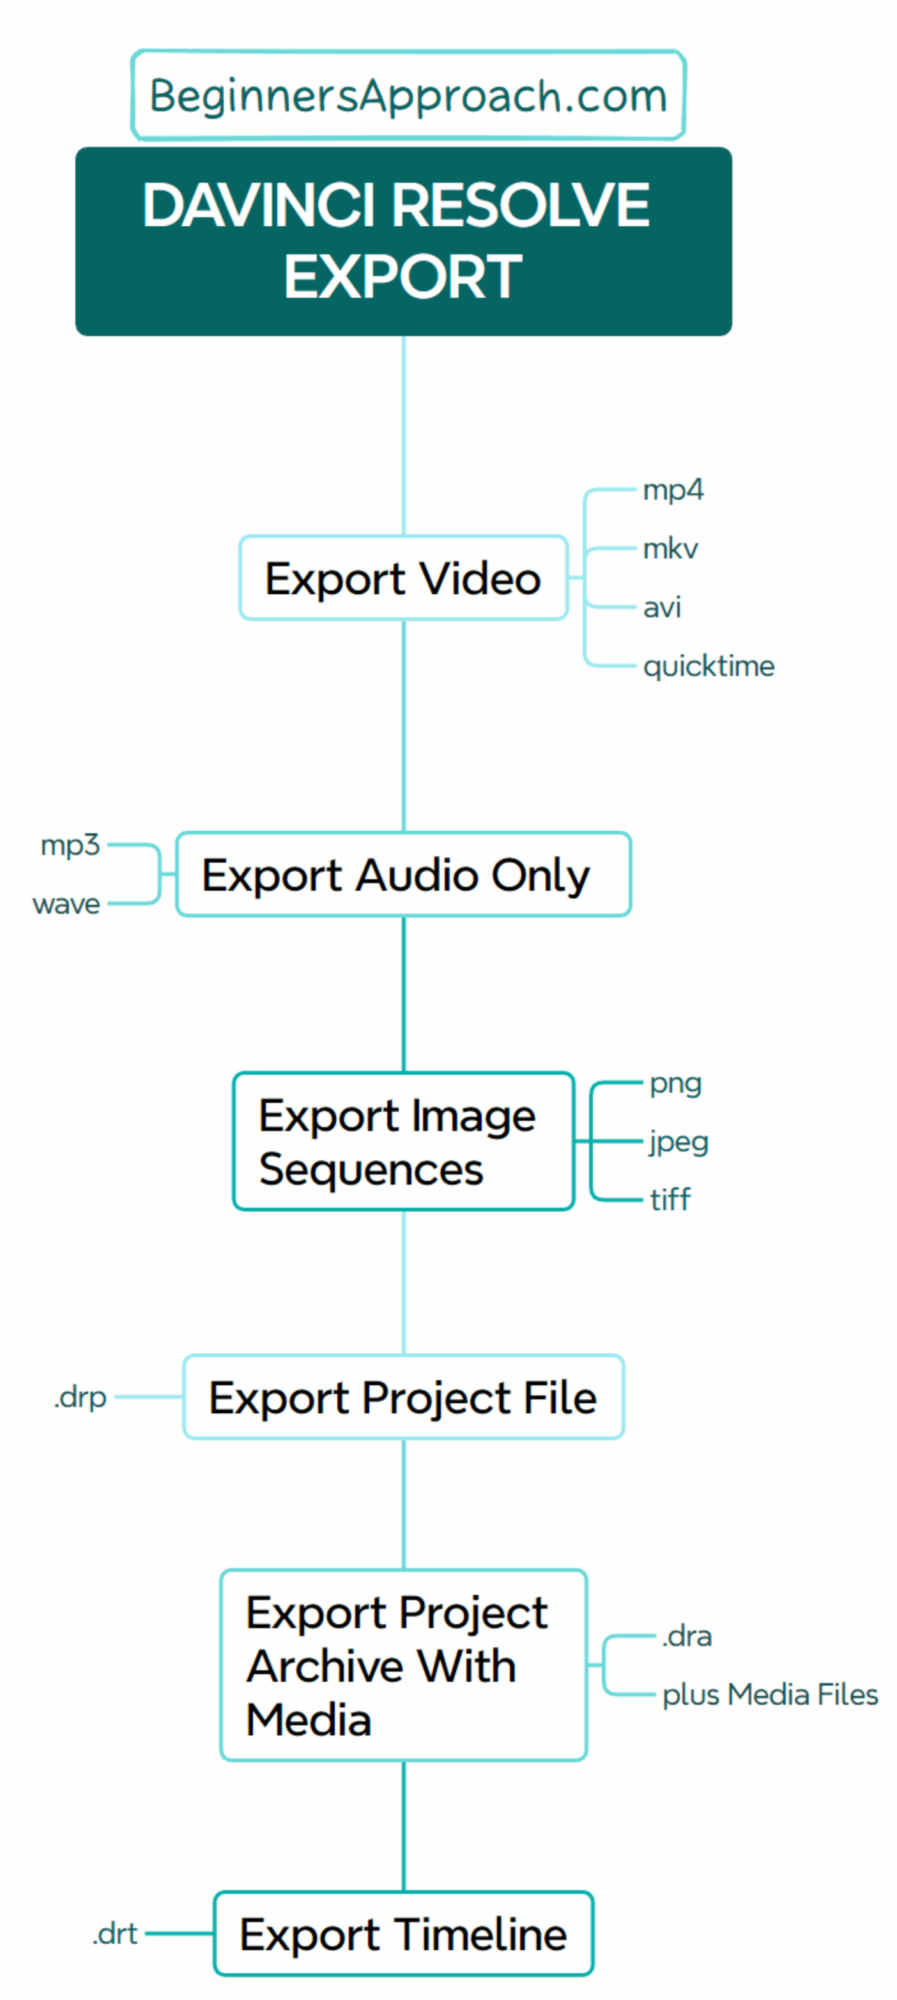 how to export in davinci resolve - export video, export audio only, export image sequence, export project, export project archive with media, export timeline